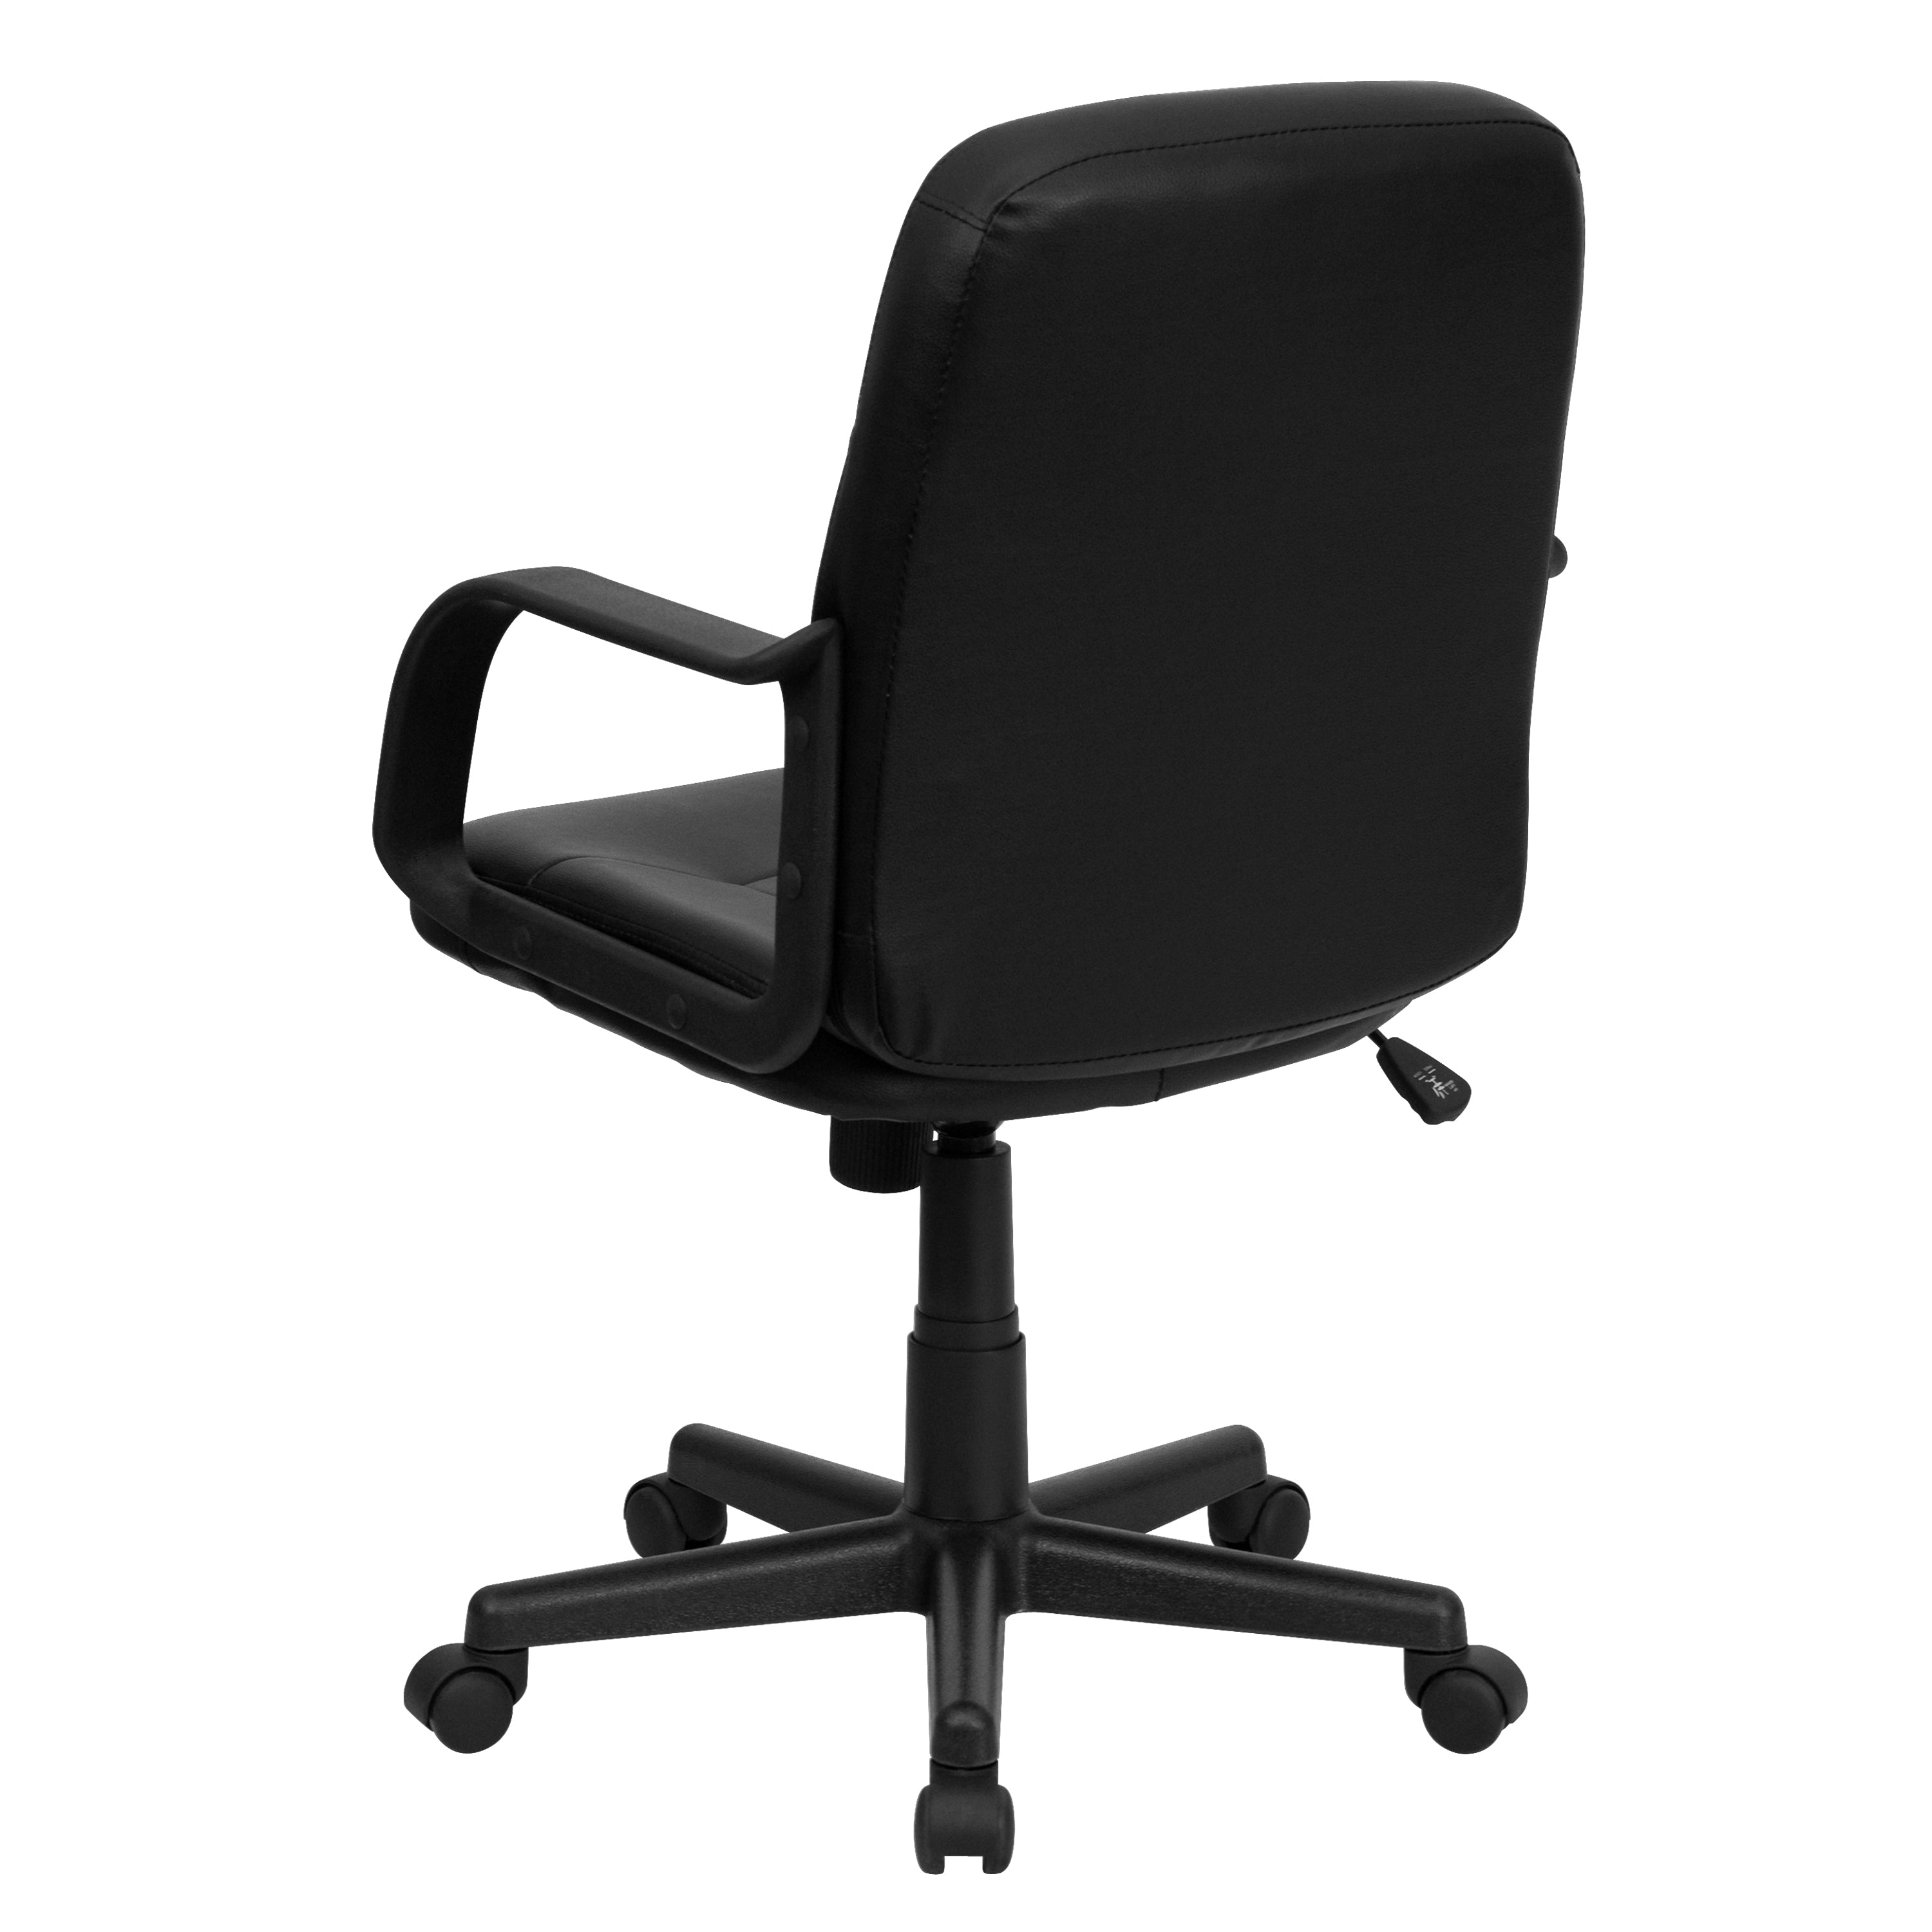 Mid-Back Glove Vinyl Executive Swivel Office Chair with Arms-Office Chair-Flash Furniture-Wall2Wall Furnishings